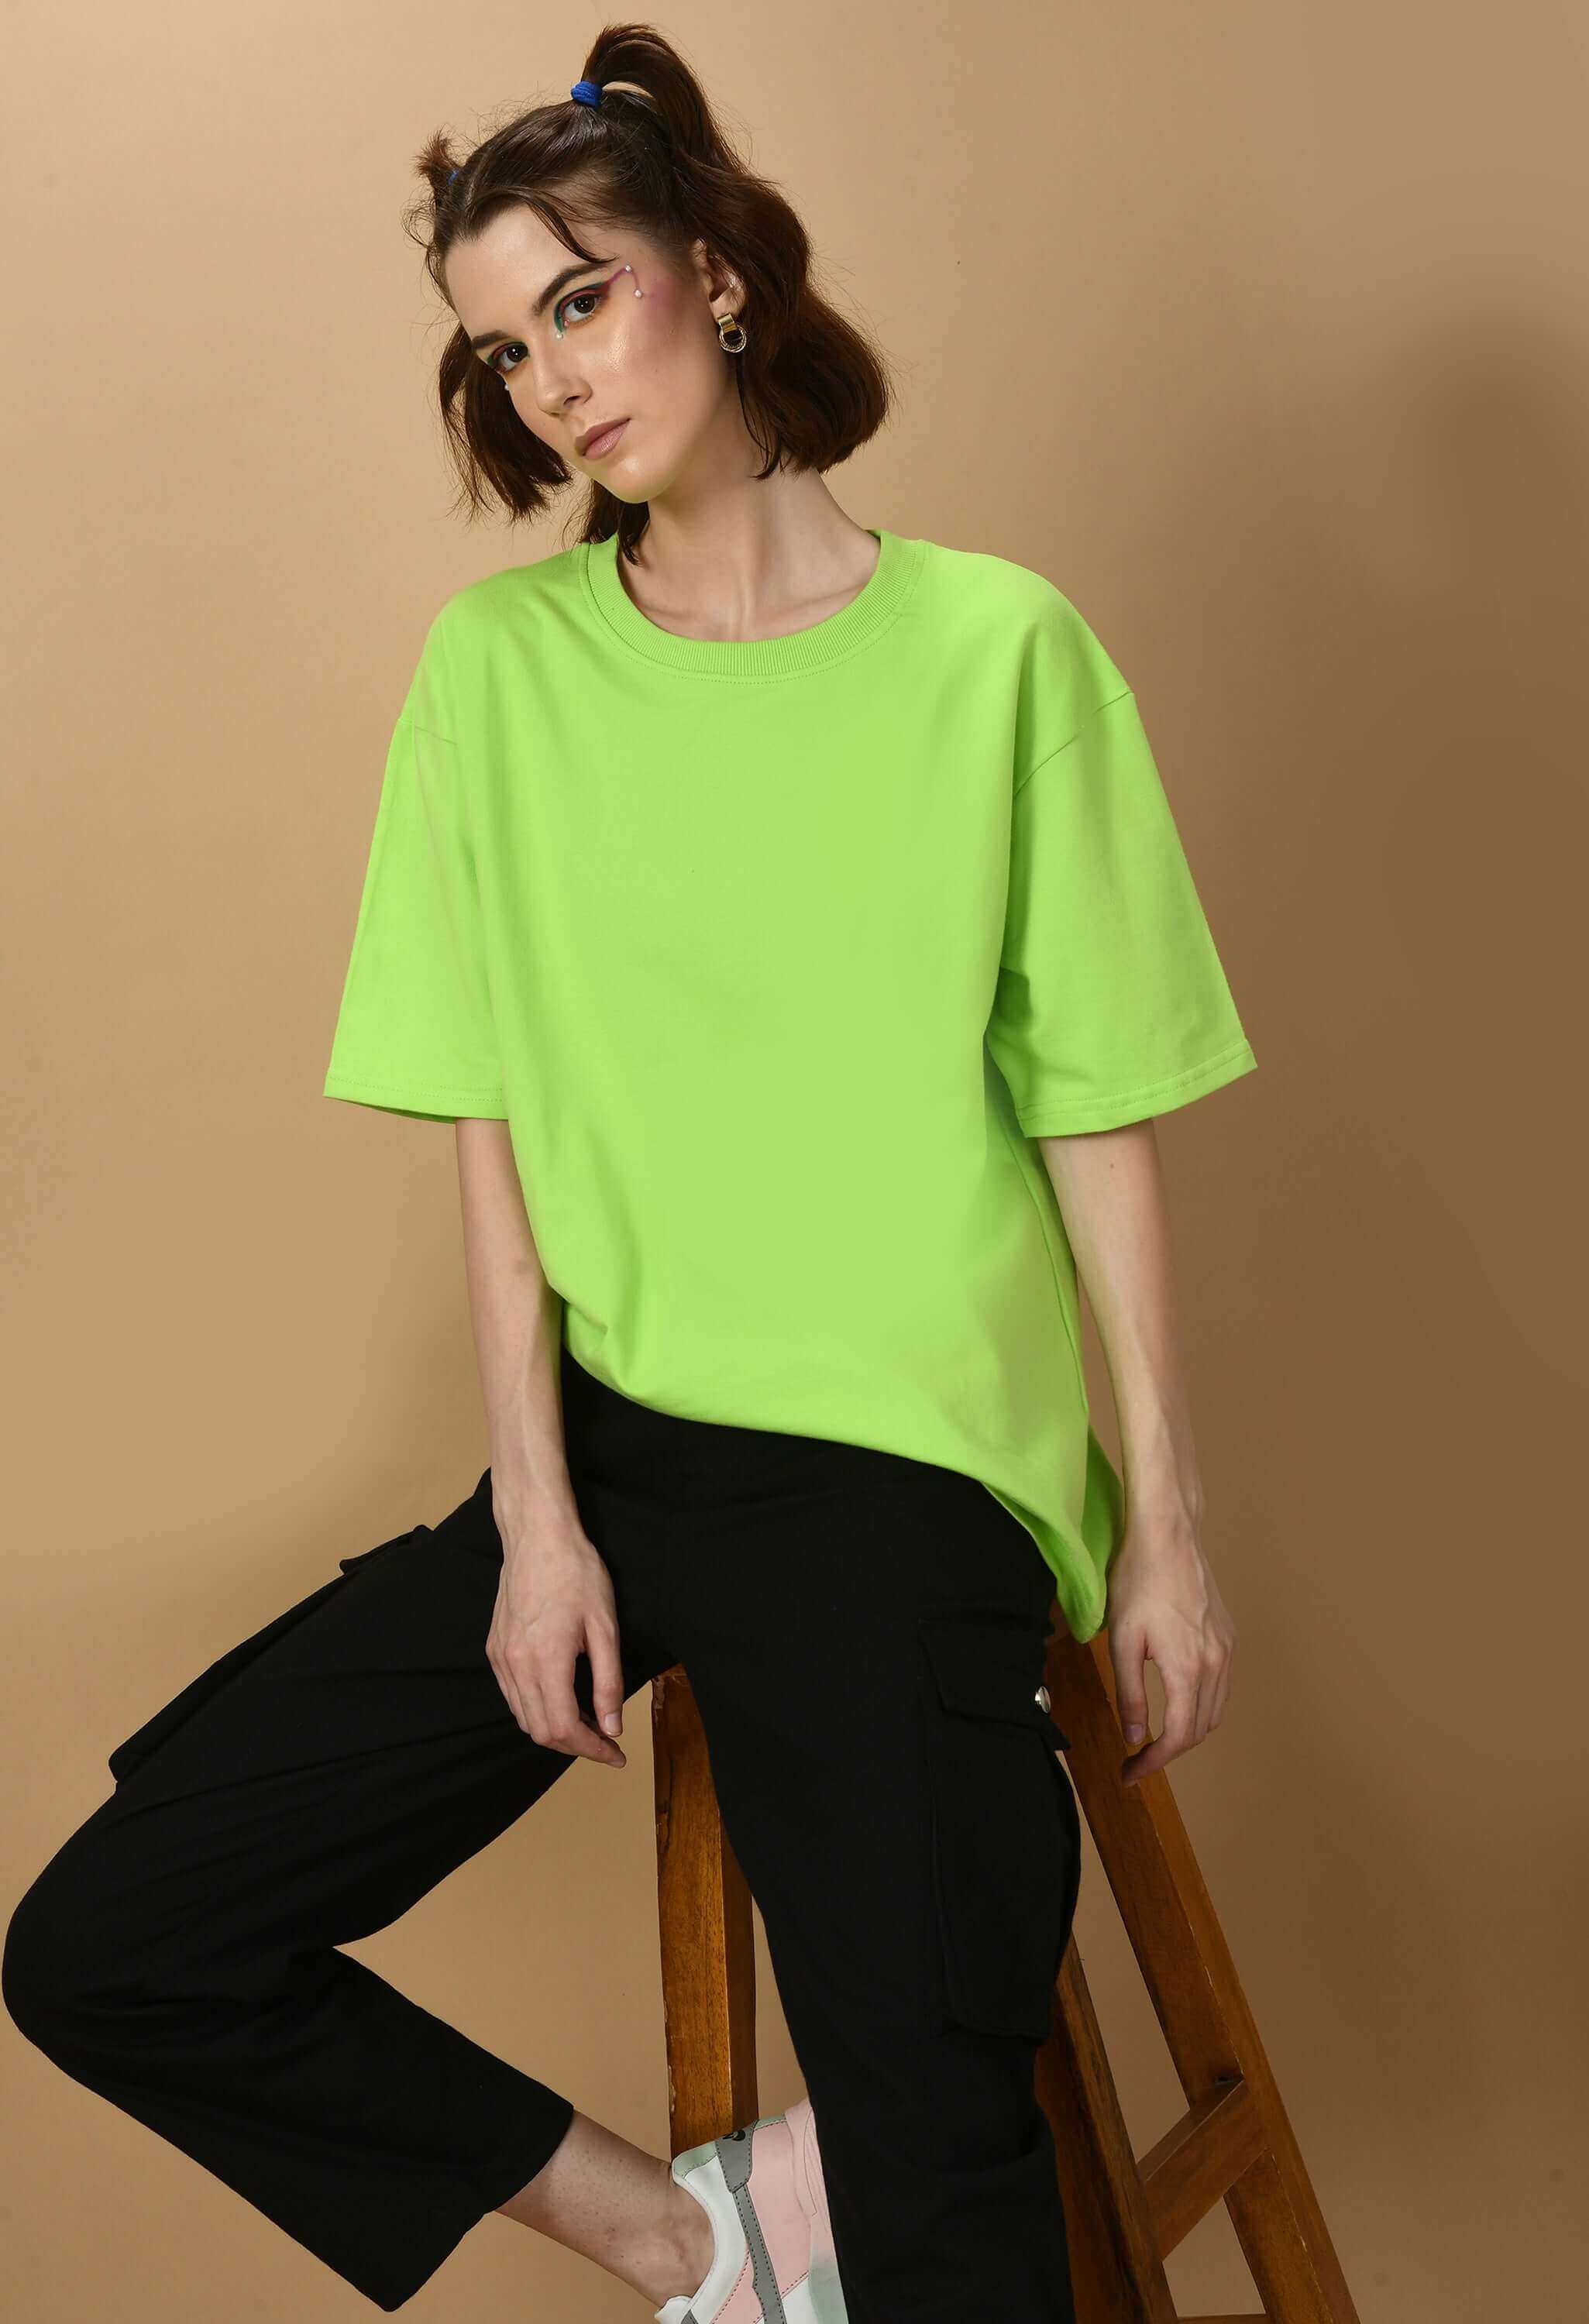 Neon color women's oversized t-shirt by offmint